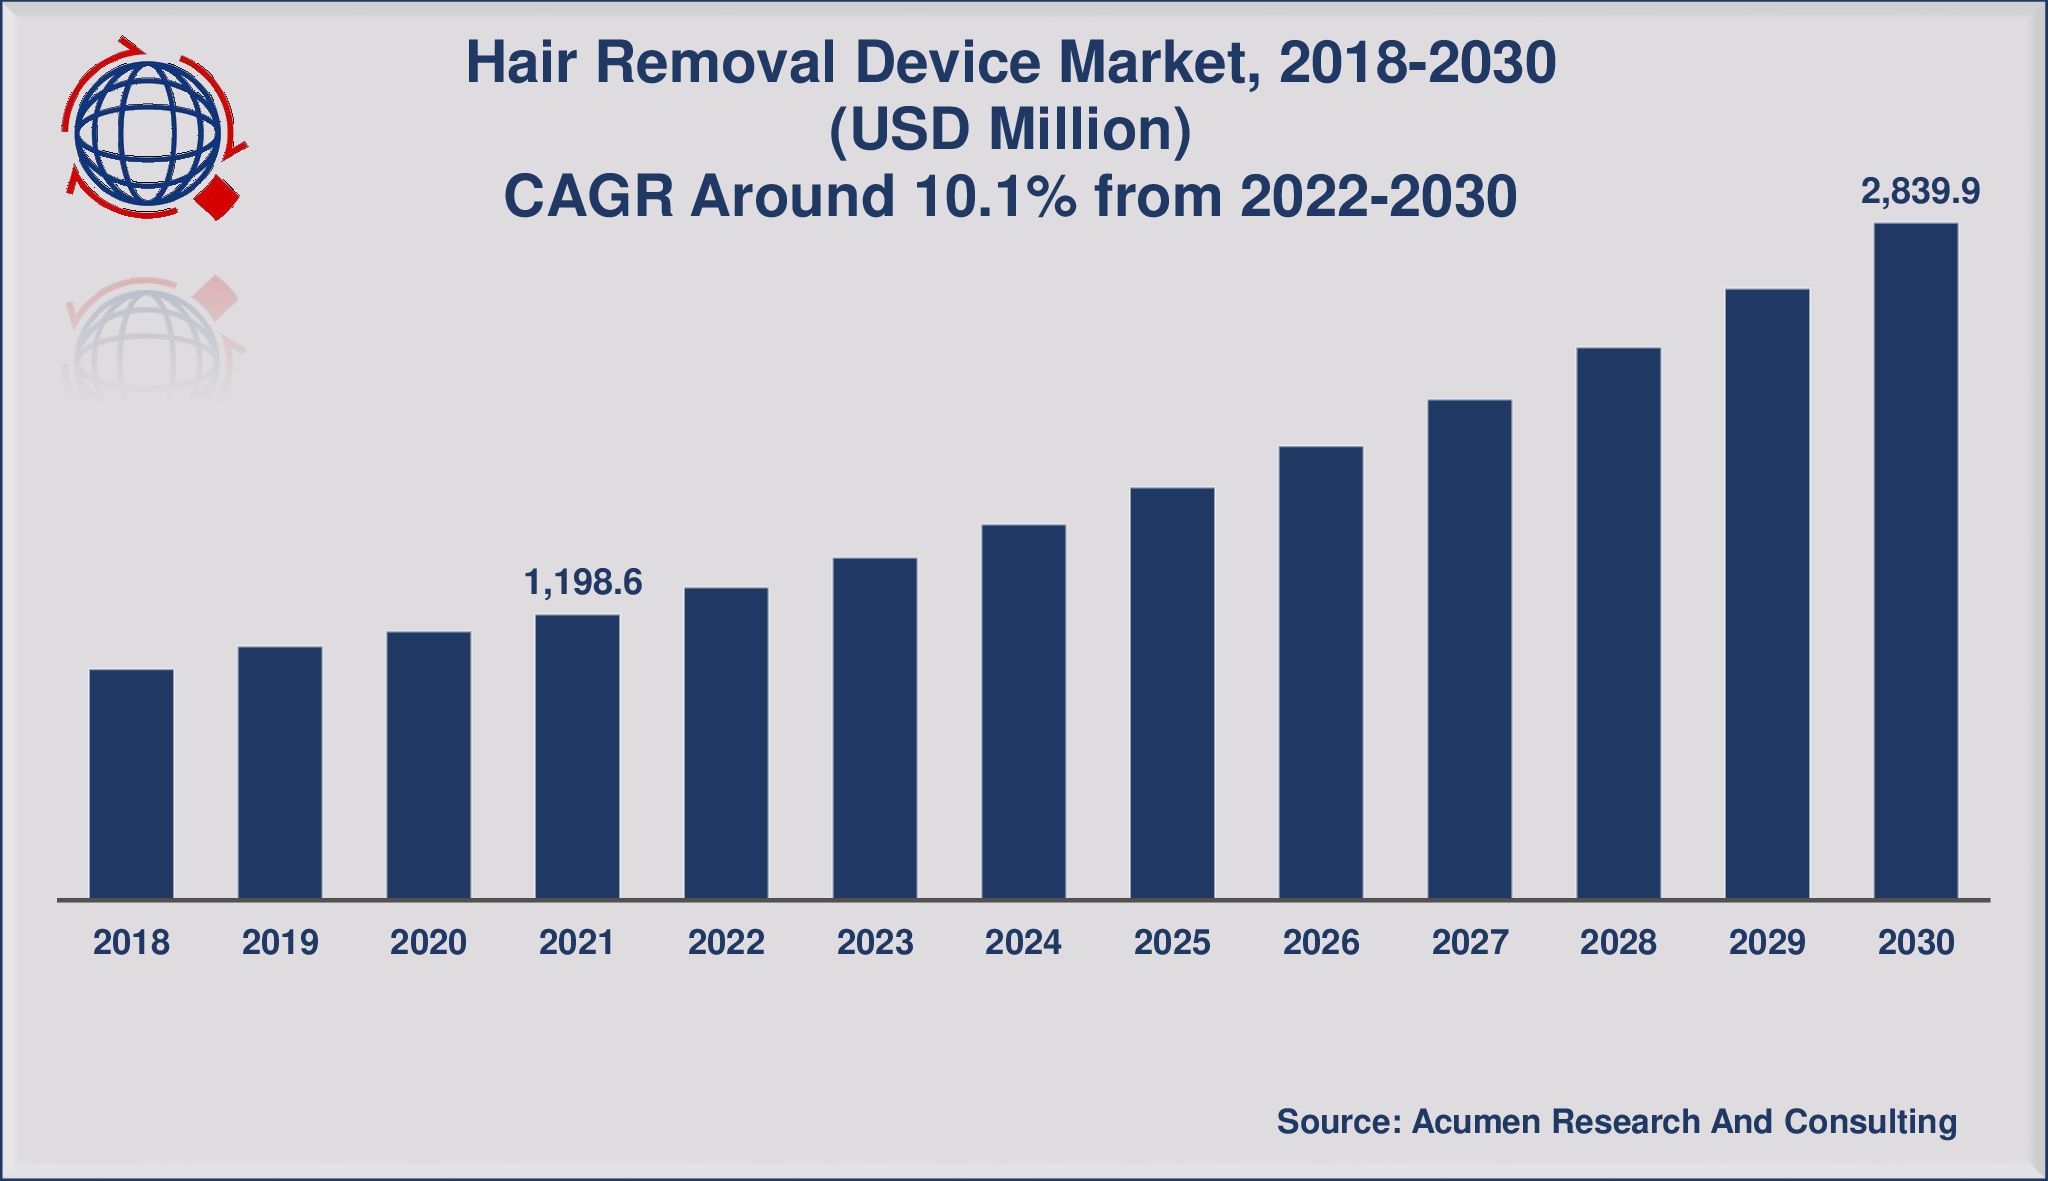 Hair Removal Device Market Size Will Attain USD 2,